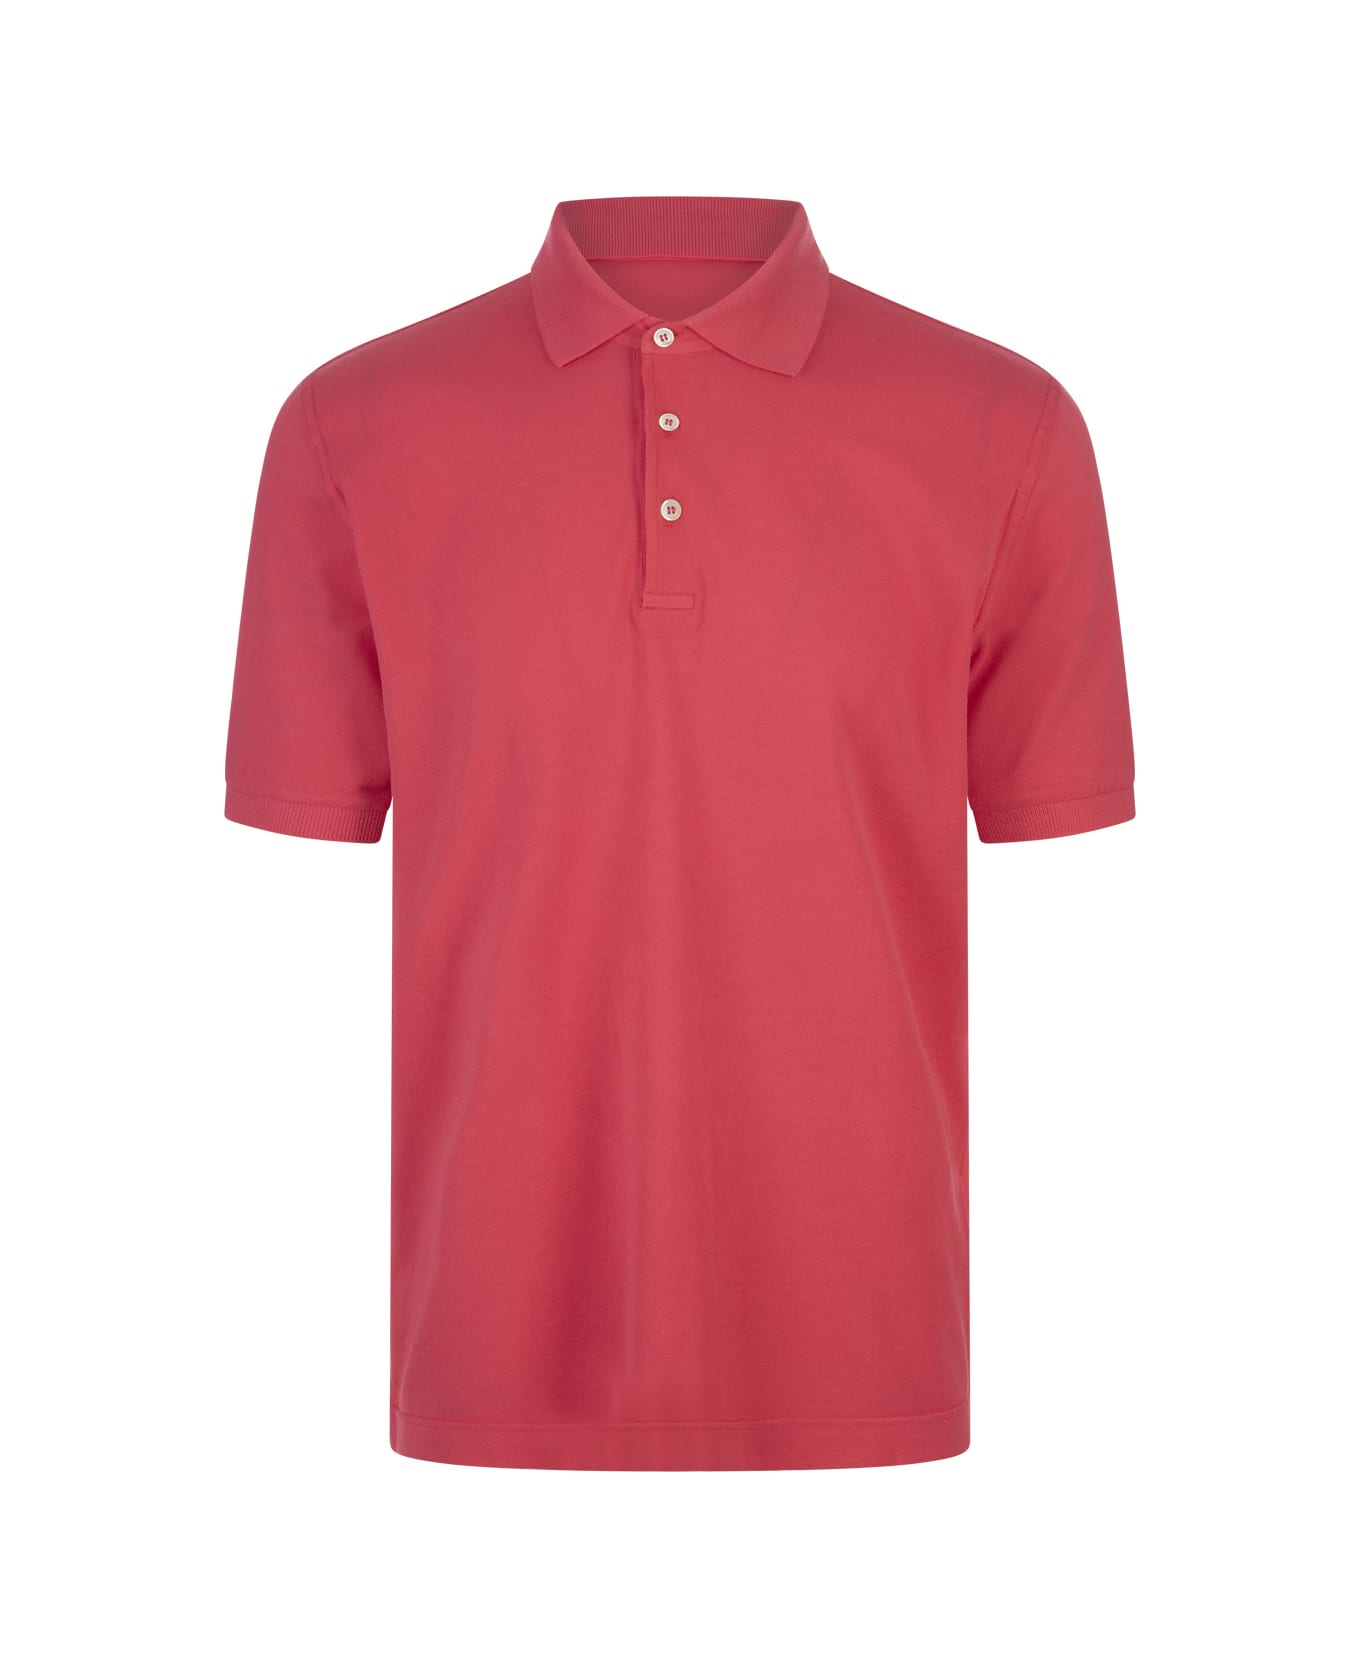 Fedeli Red Cotton Pique Polo Shirt - Red ポロシャツ